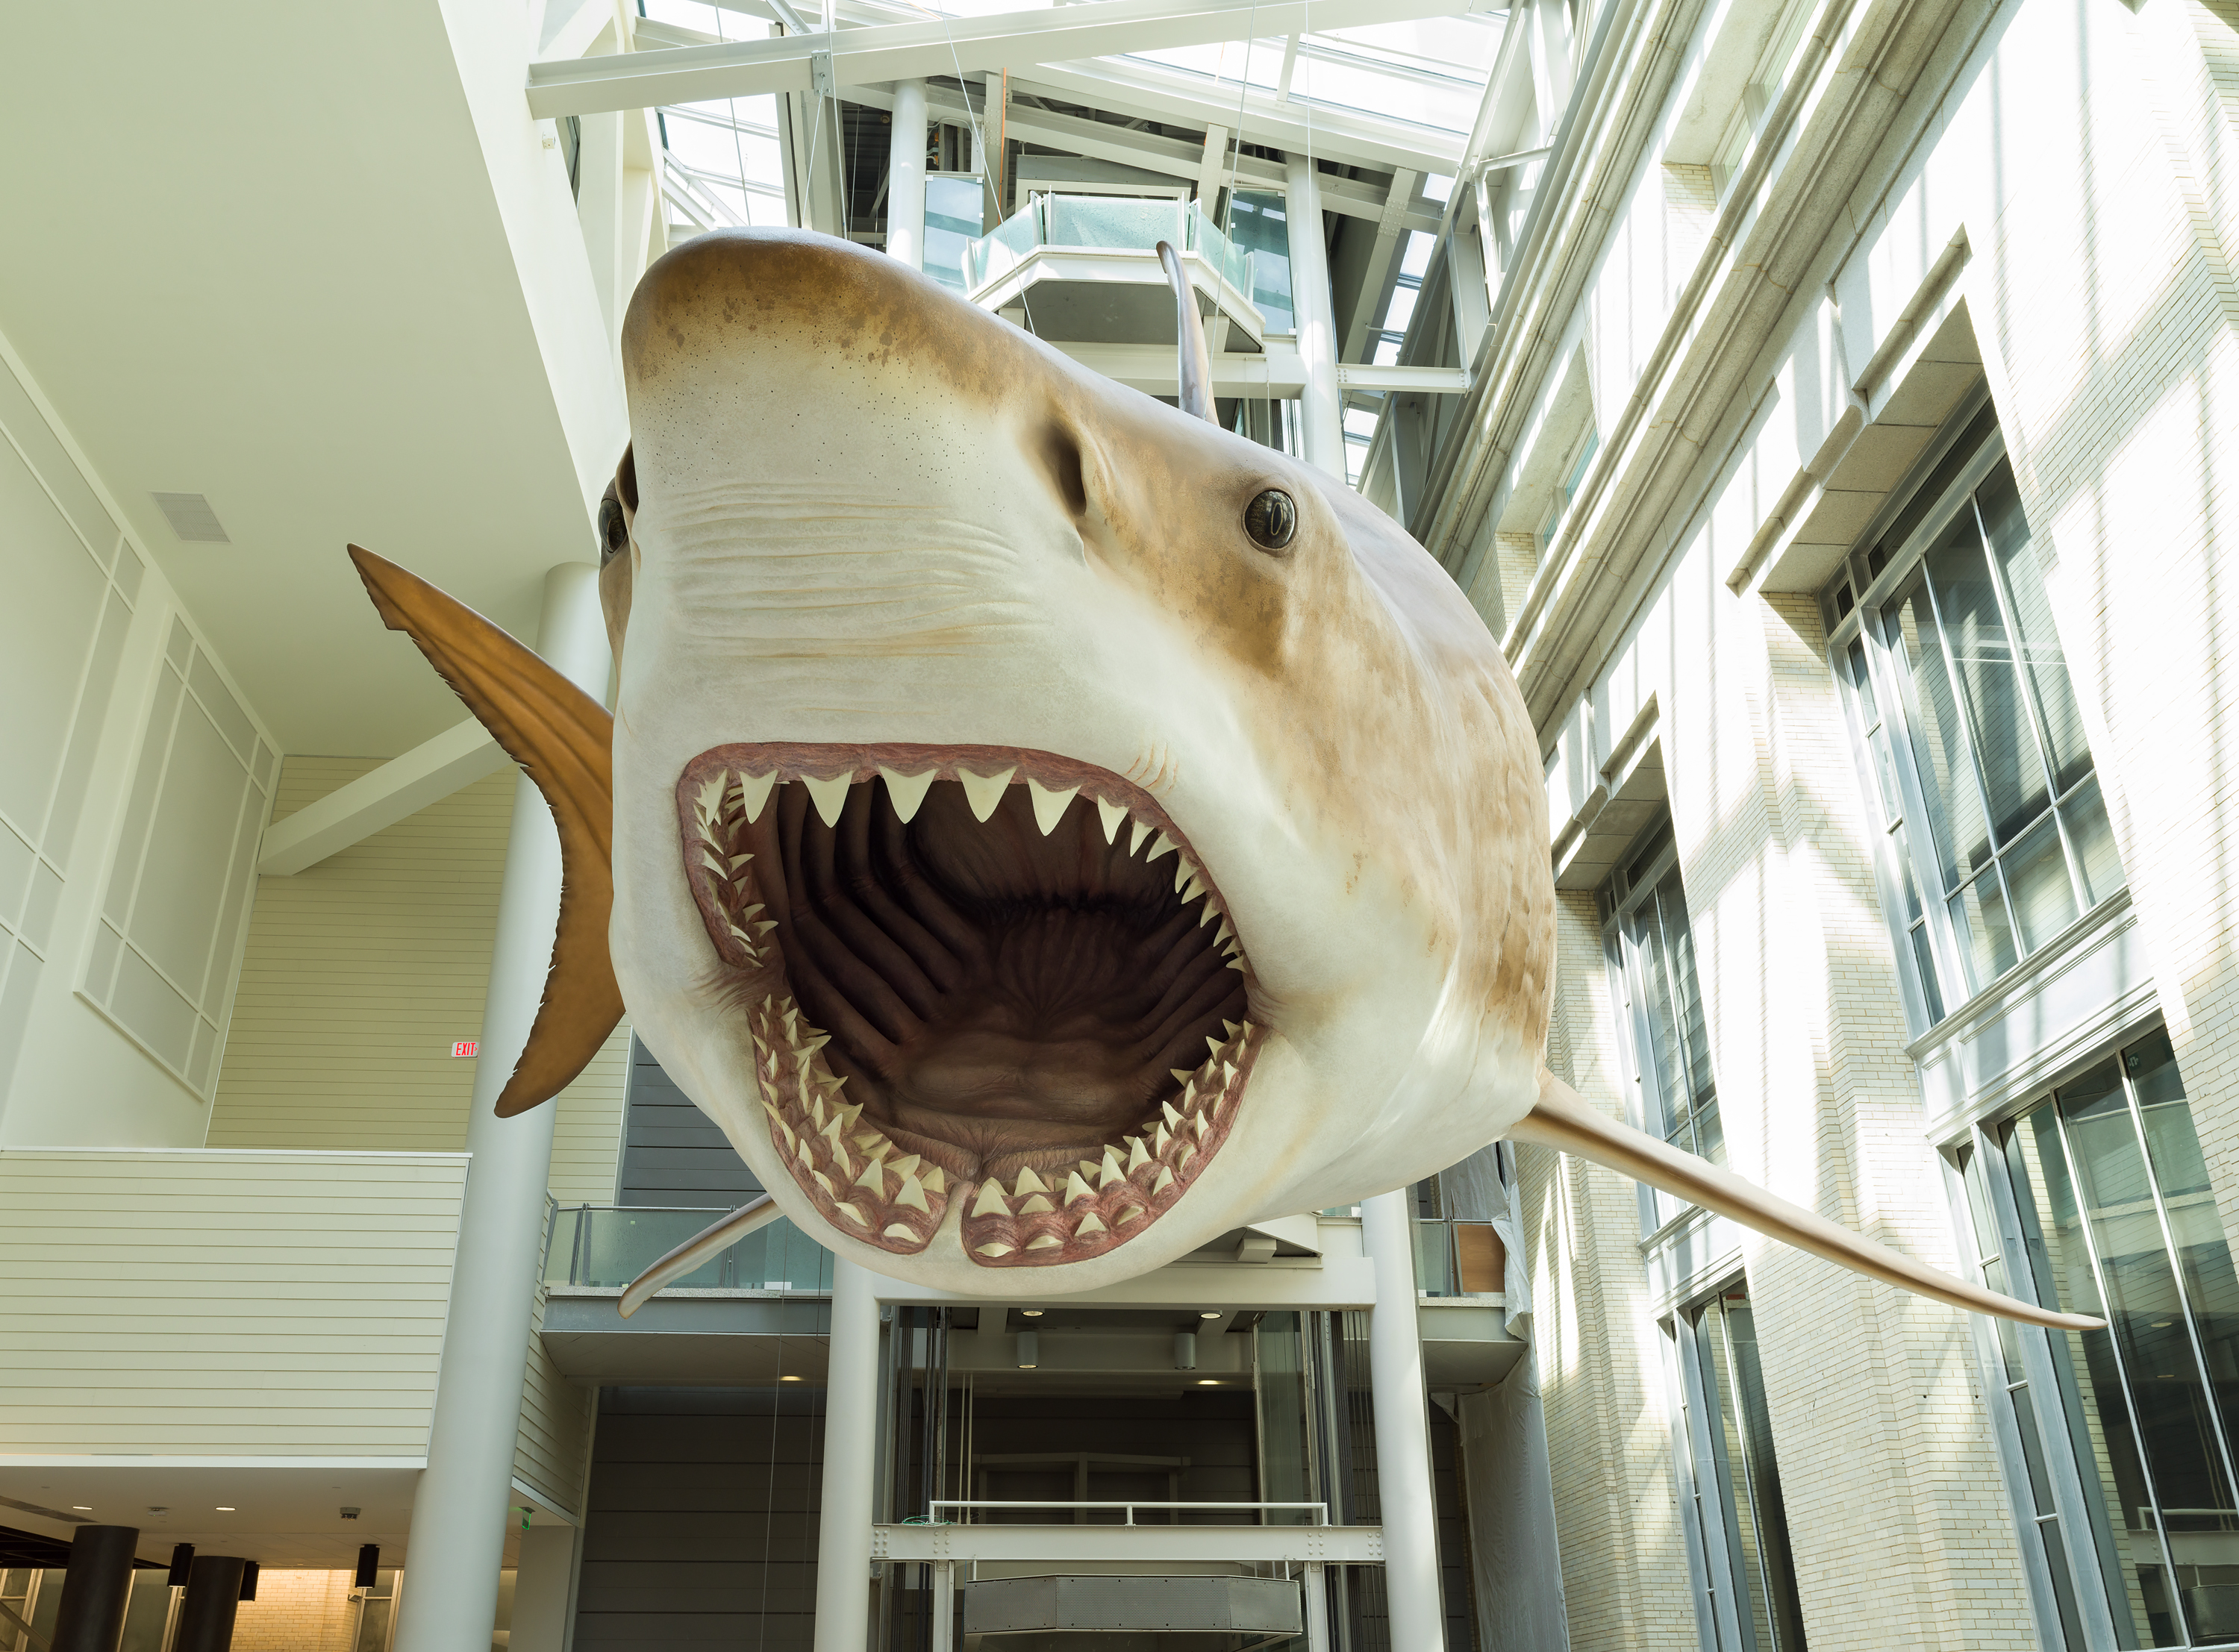 A life-size model of <i>C. megalodon</i> greets café diners at the Smithsonian’s National Museum of Natural History. Photo courtesy Lucia RM Martino, Smithsonian Institution. (Click image to download hi-res version)